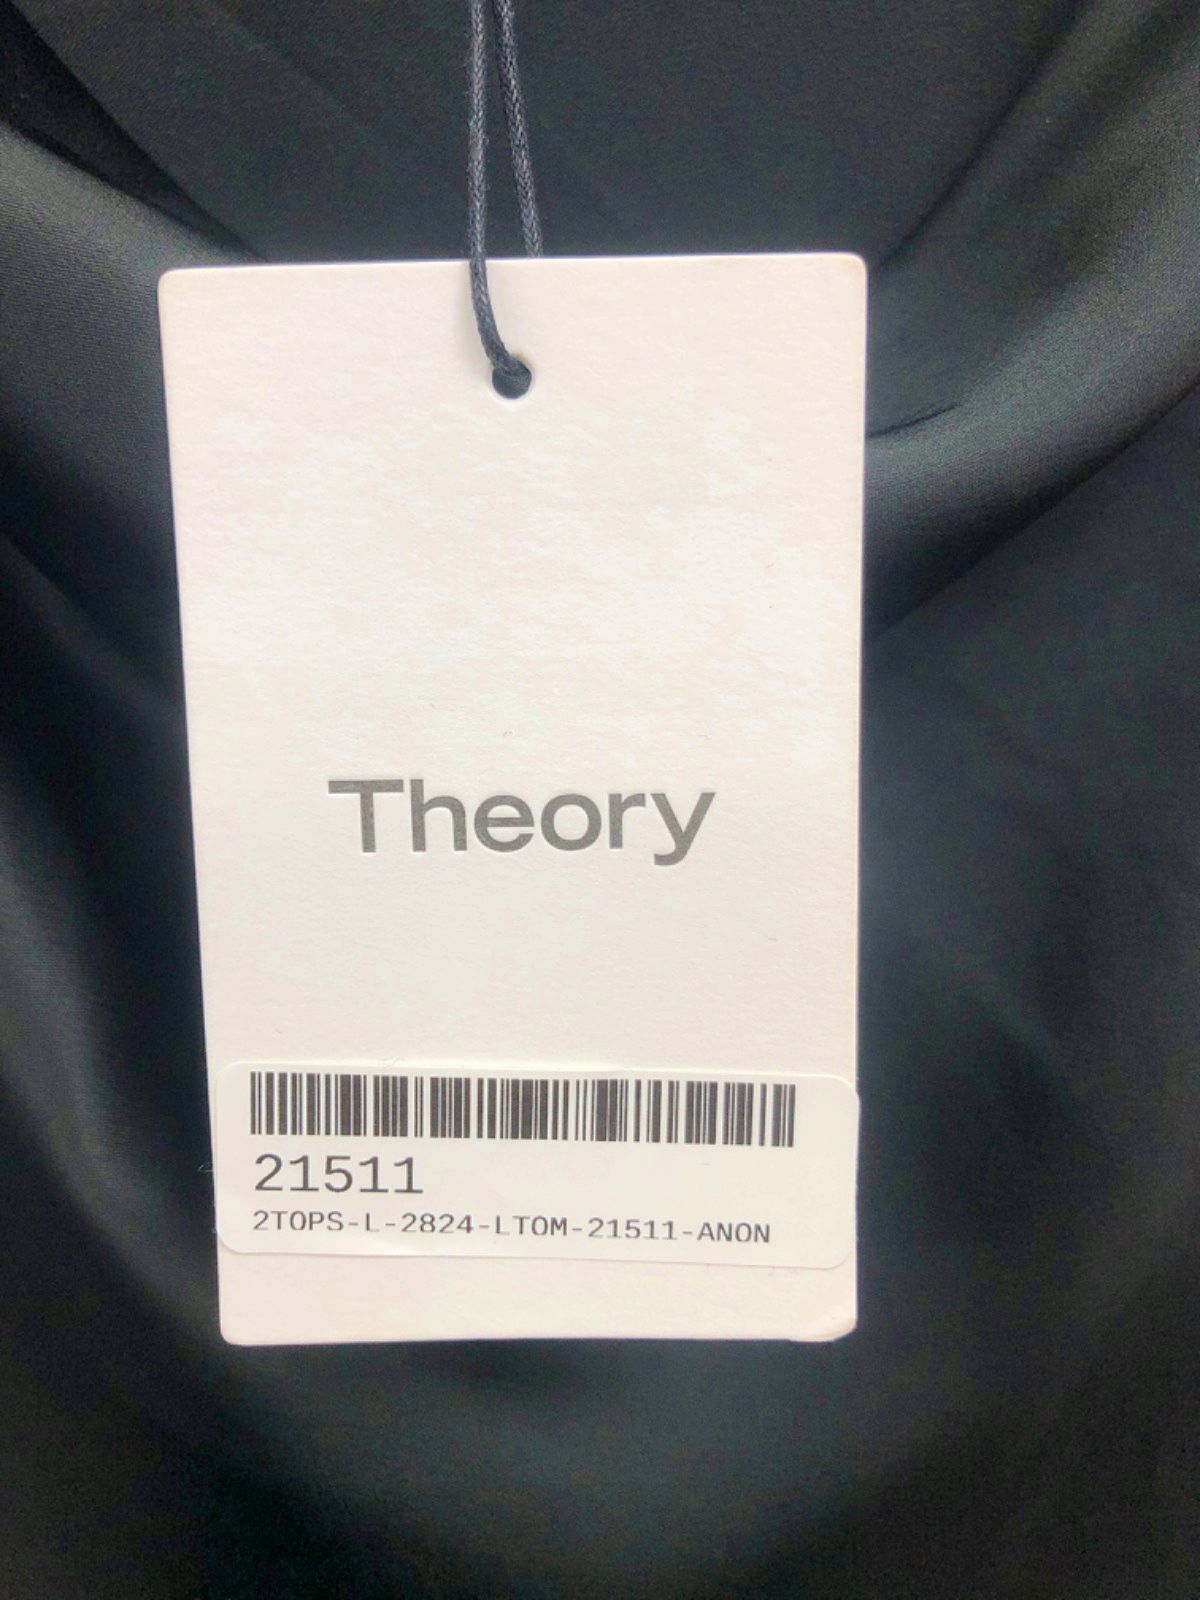 Theory Black Cowl Neck Soft Satin Camisole Top Size S